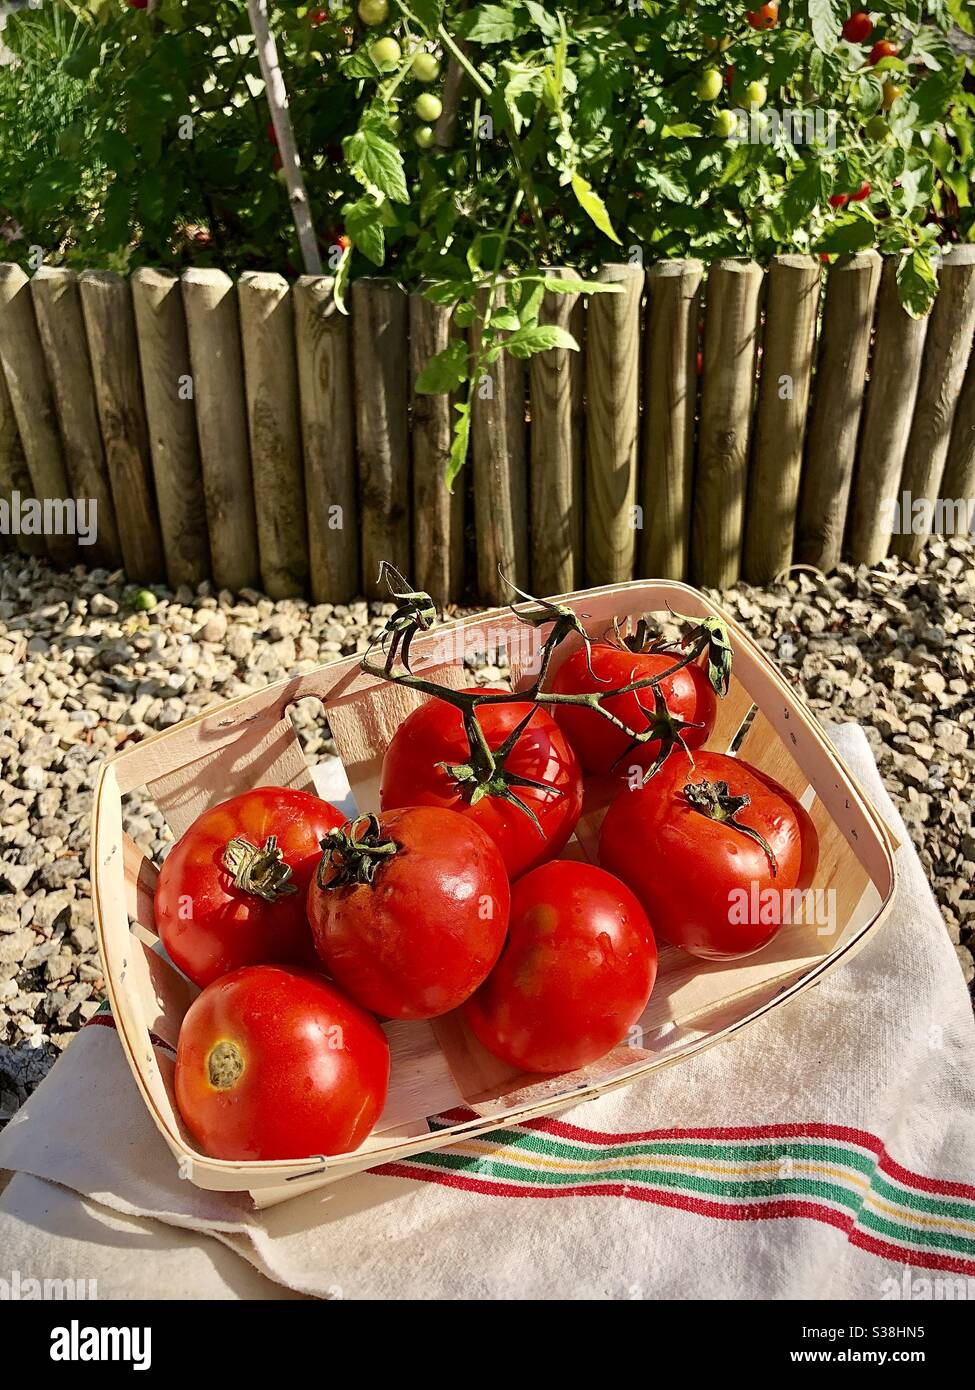 Freshly picked red tomatoes grown in the garden. Stock Photo